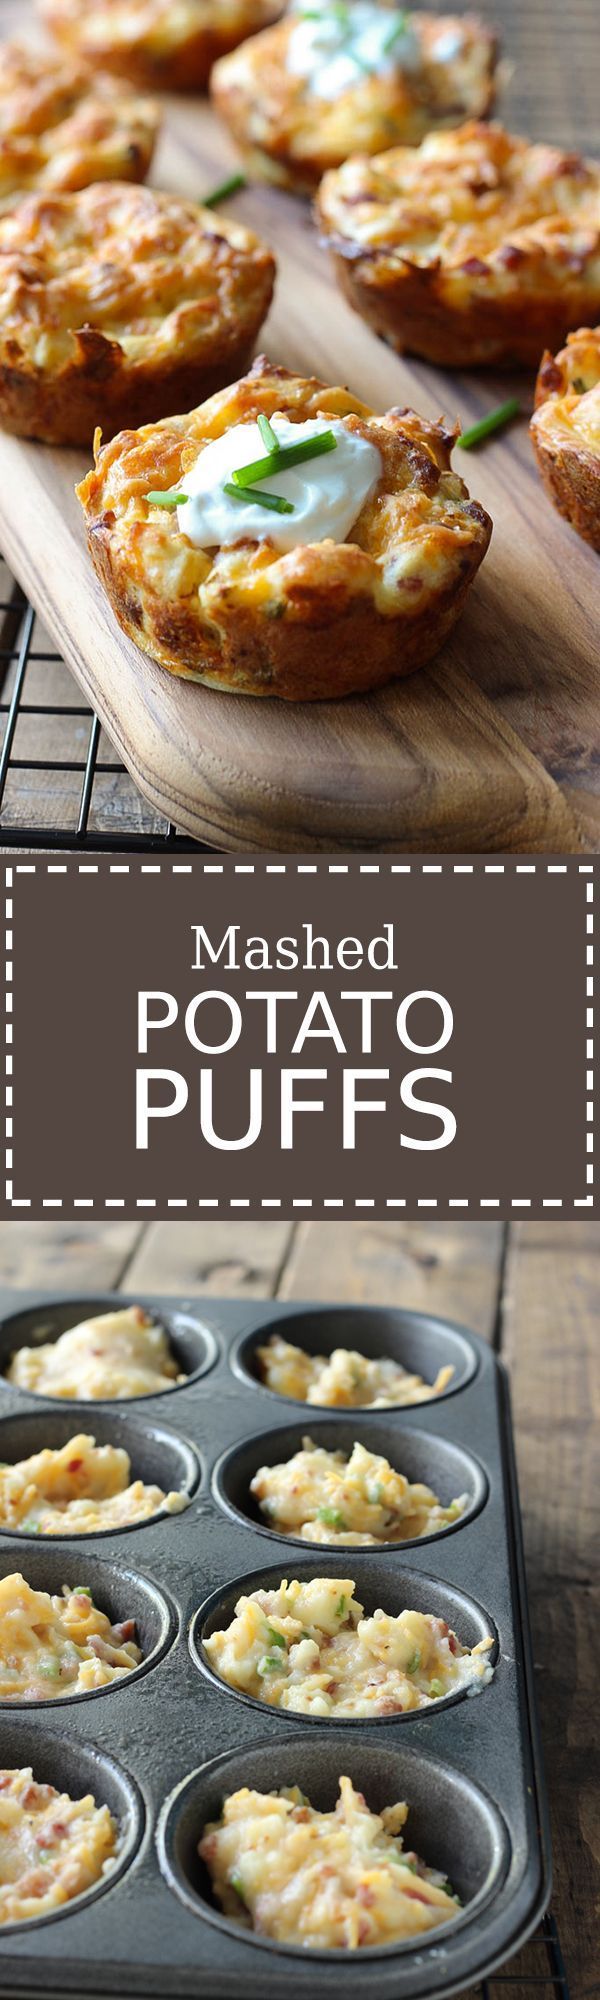 Work some magic on your mashed potatoes with mashed potato puffs! These loaded potato puffs will breathe some new life into your